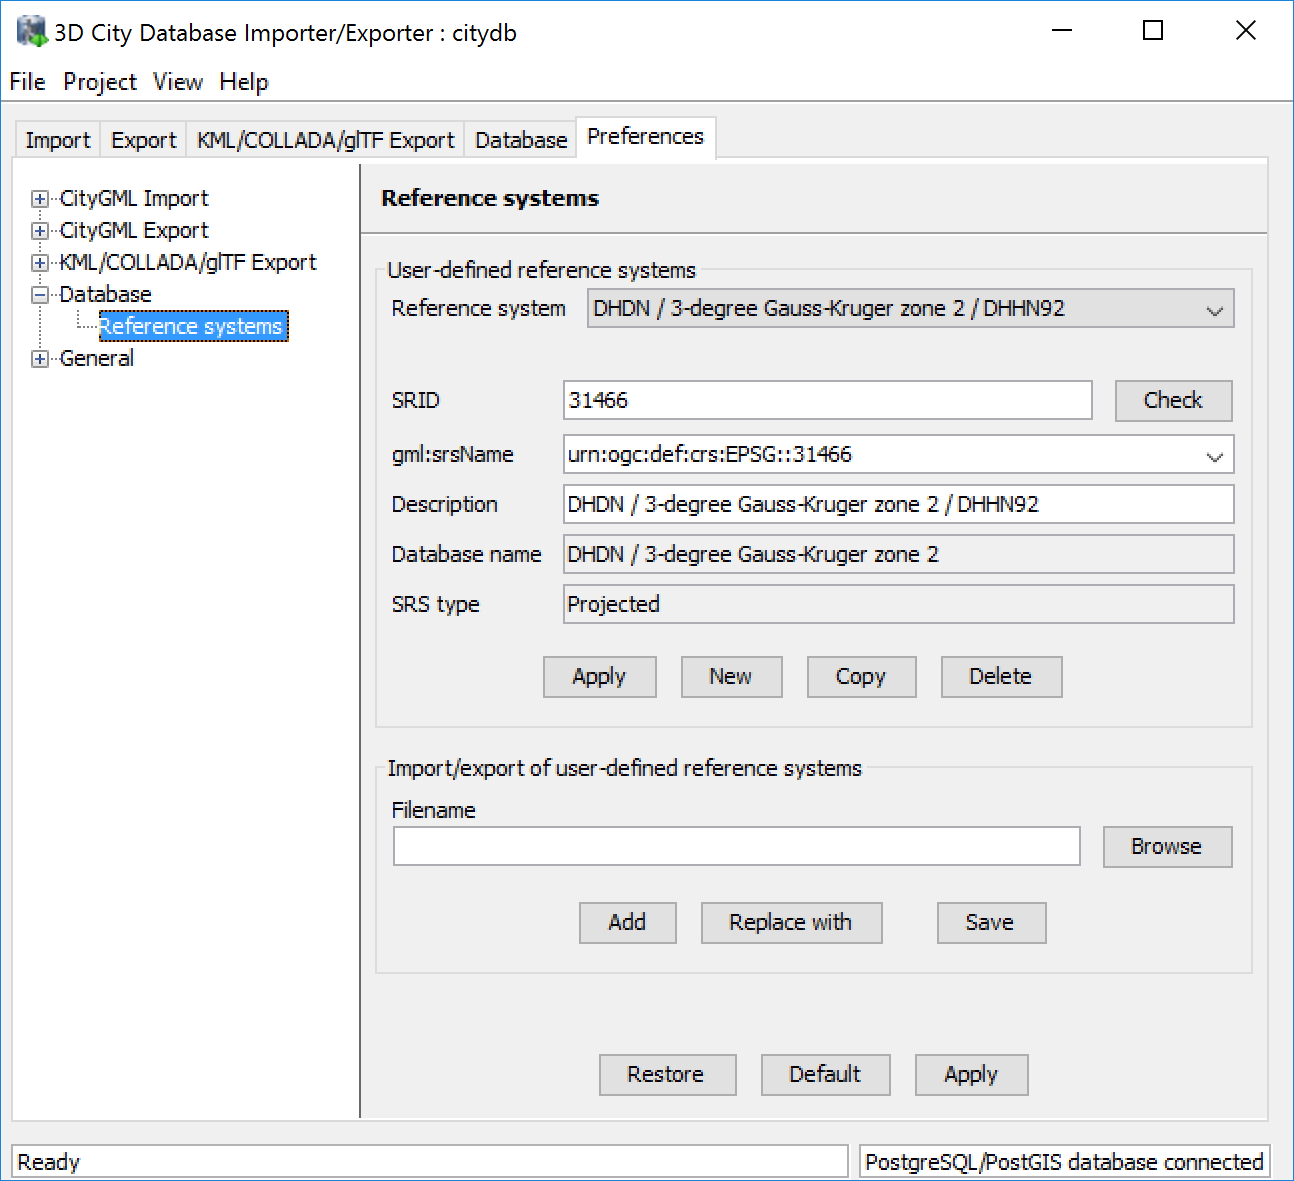 ../../_images/impexp_database_preferences_add_crs_fig.png